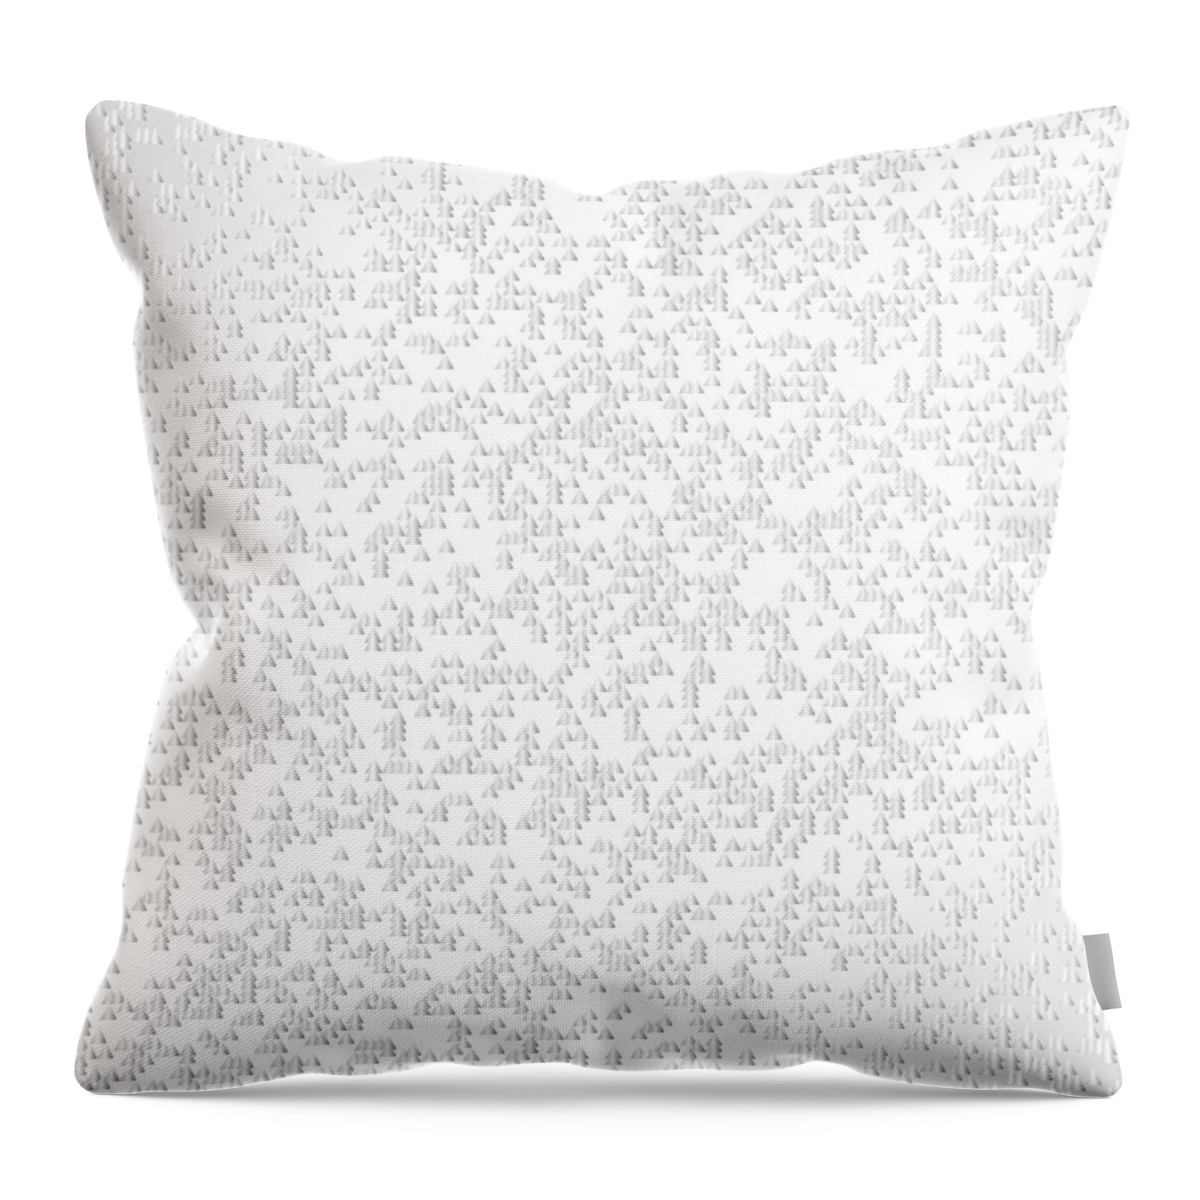 Abstract Throw Pillow featuring the digital art White.30 by Gareth Lewis